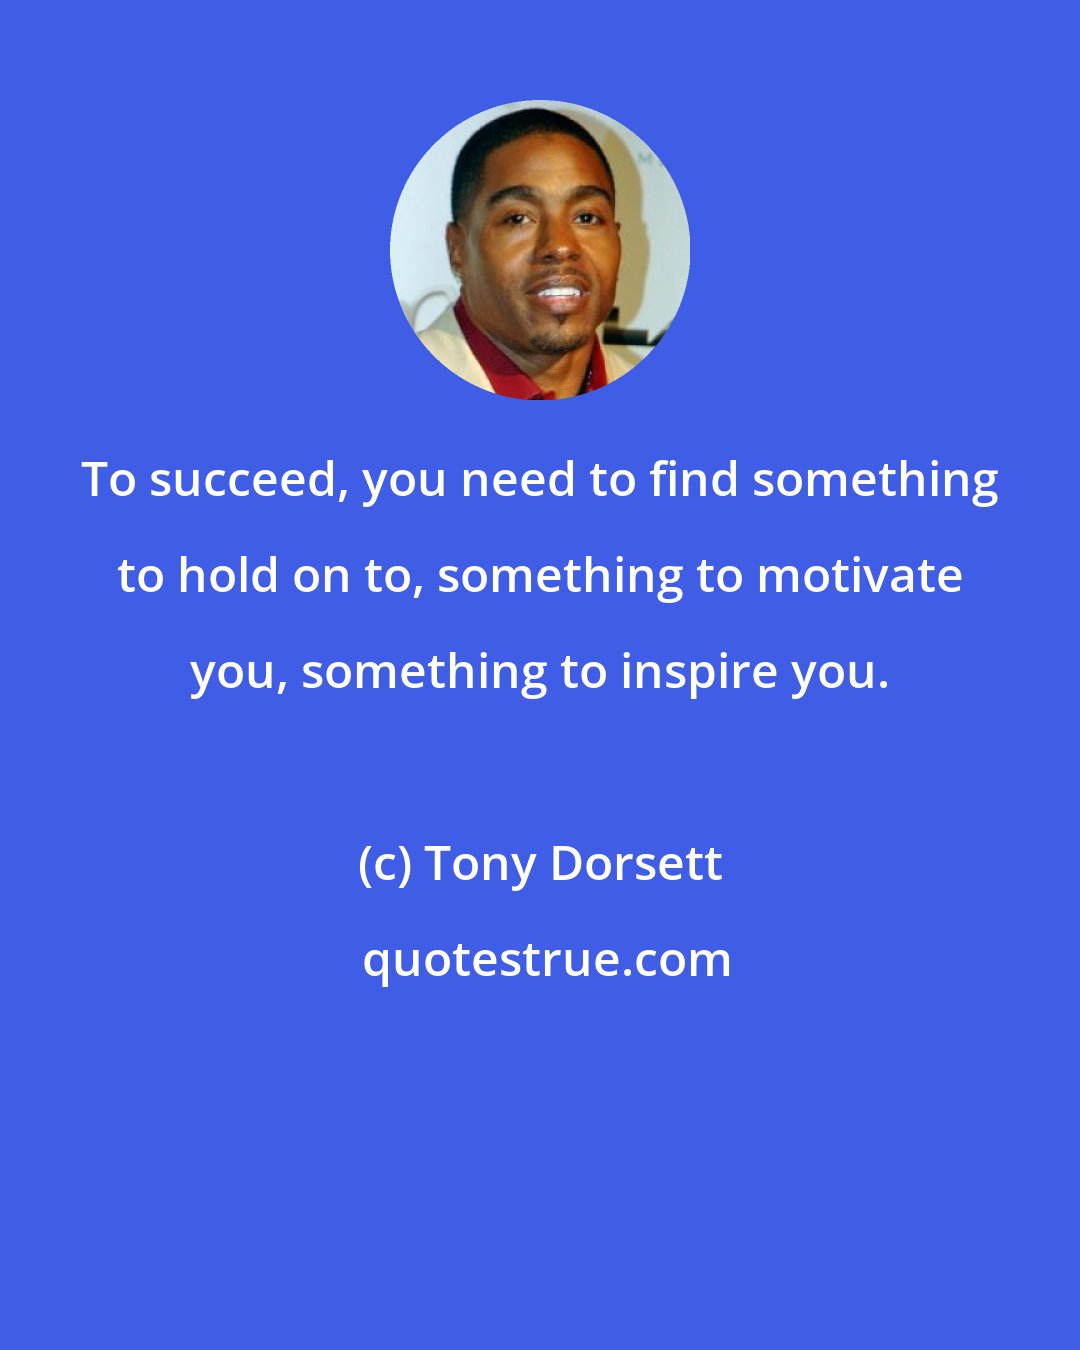 Tony Dorsett: To succeed, you need to find something to hold on to, something to motivate you, something to inspire you.